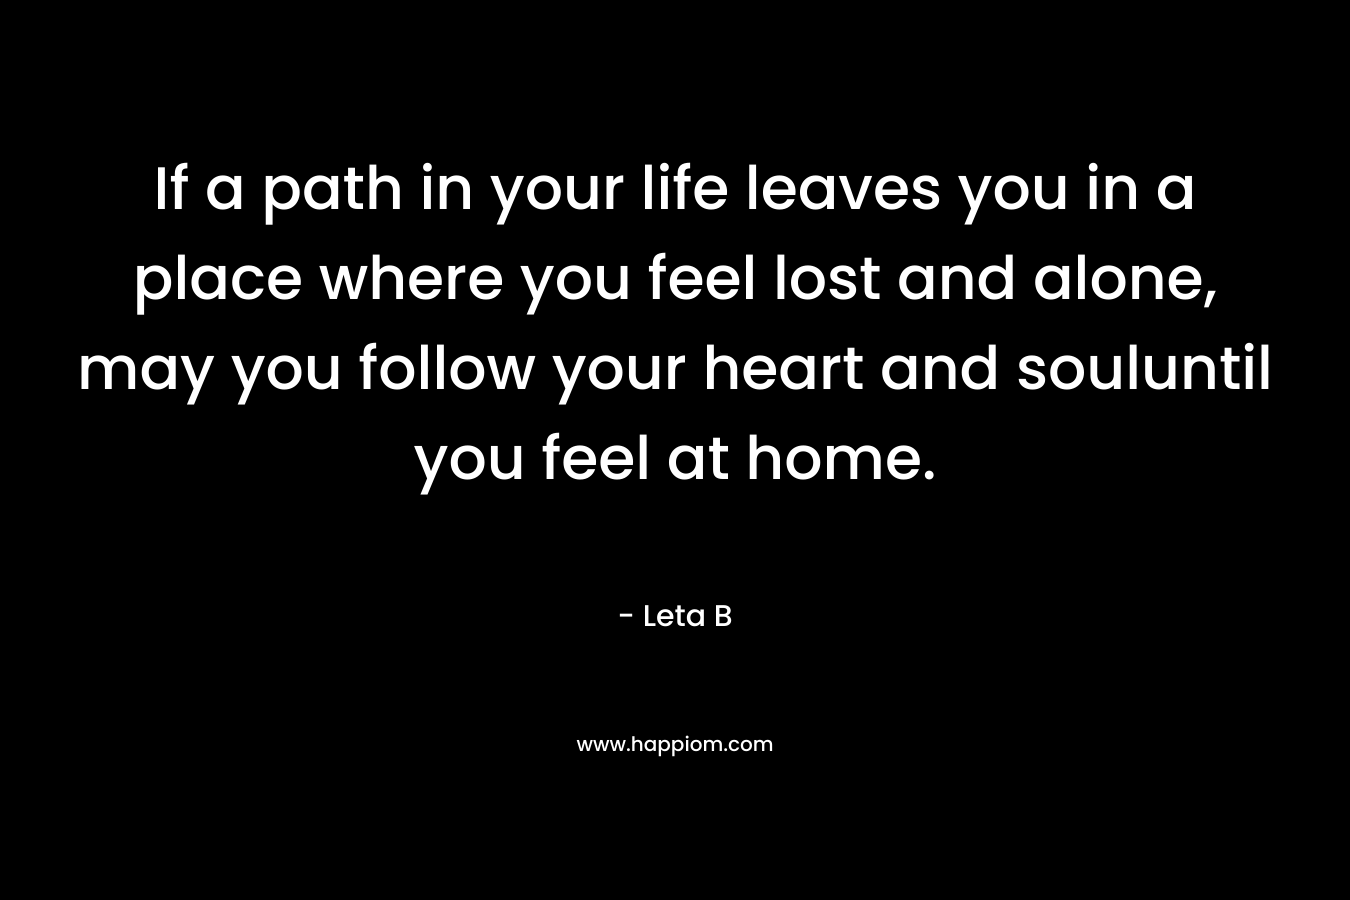 If a path in your life leaves you in a place where you feel lost and alone, may you follow your heart and souluntil you feel at home.